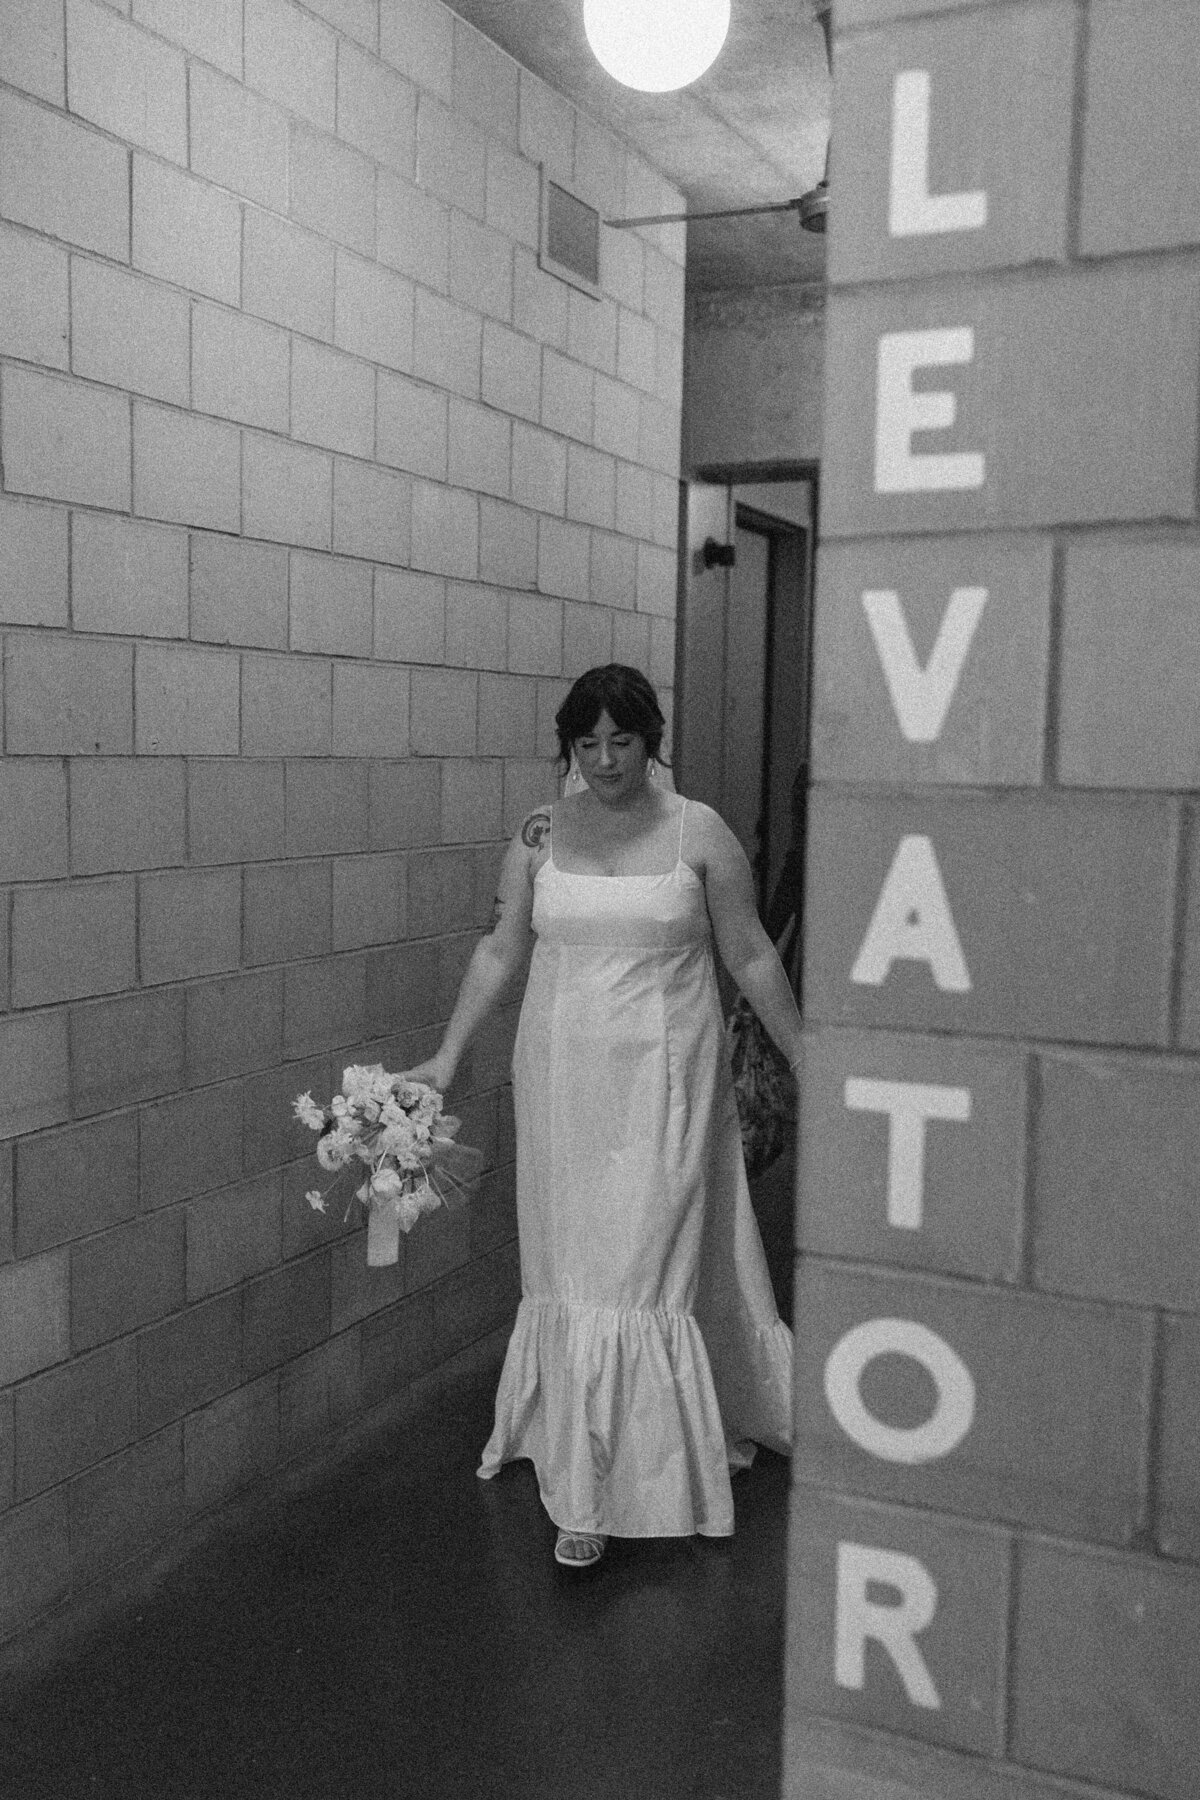 Bride walking through hallway past a sign that says elevator